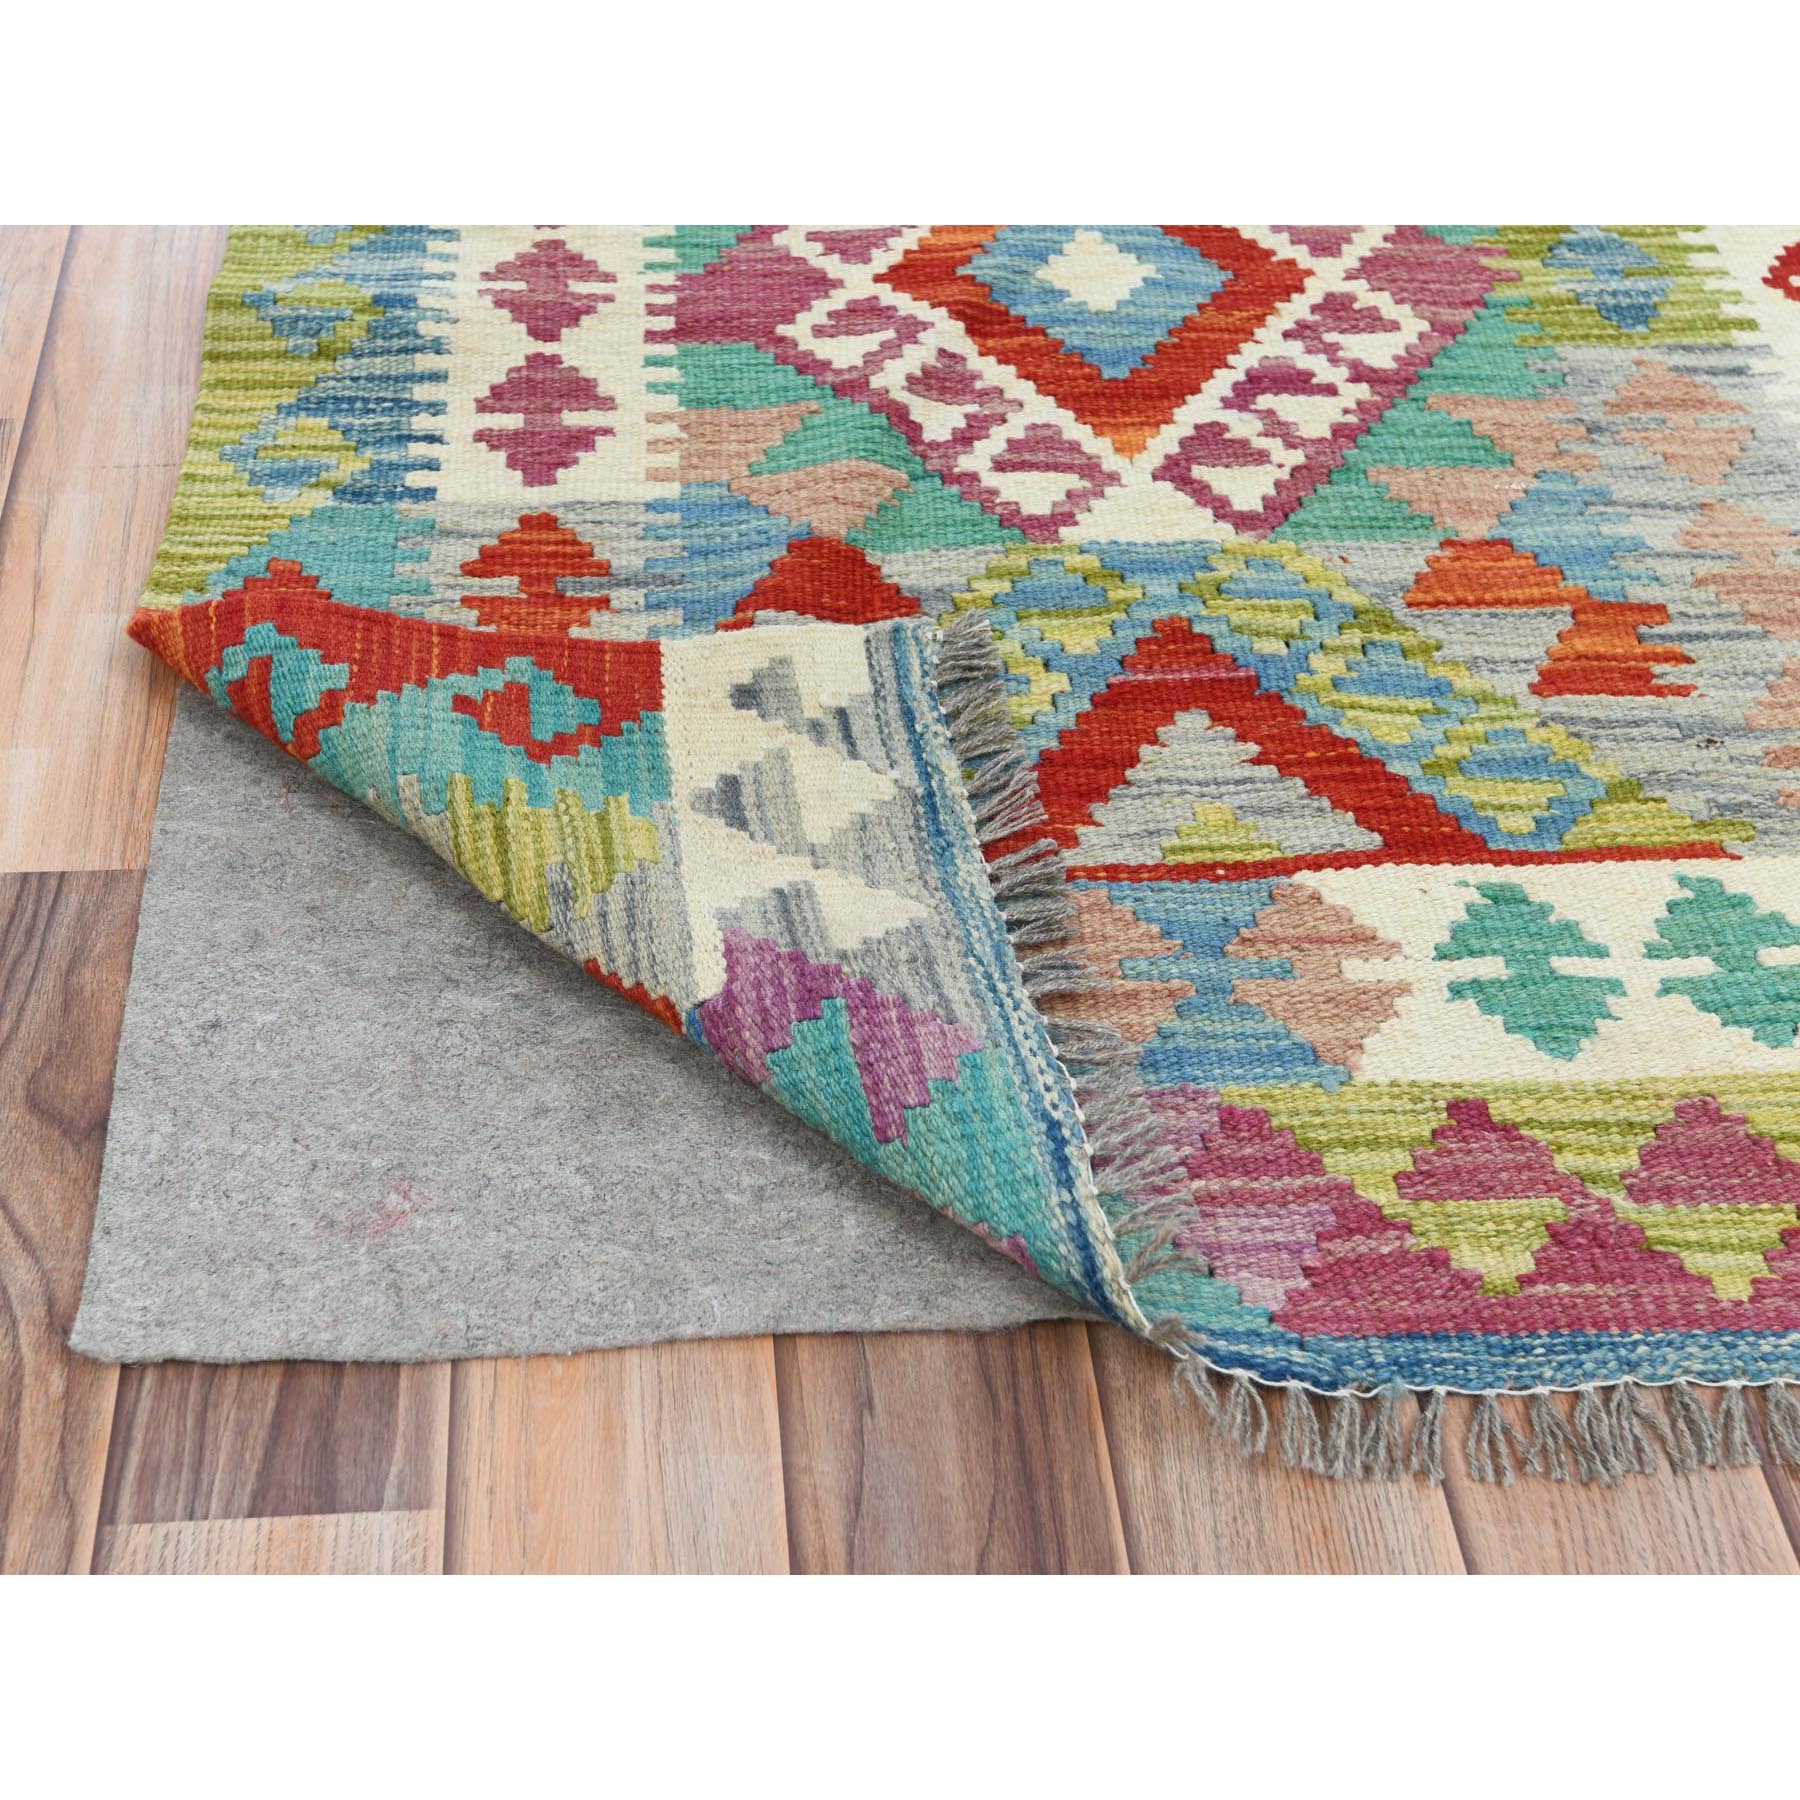 2'8"x15'9" Colorful, Afghan Kilim with Geometric Design, Hand Woven, Reversible, Vegetable Dyes, Flat Weave, Pure Wool XL Runner Oriental Rug 